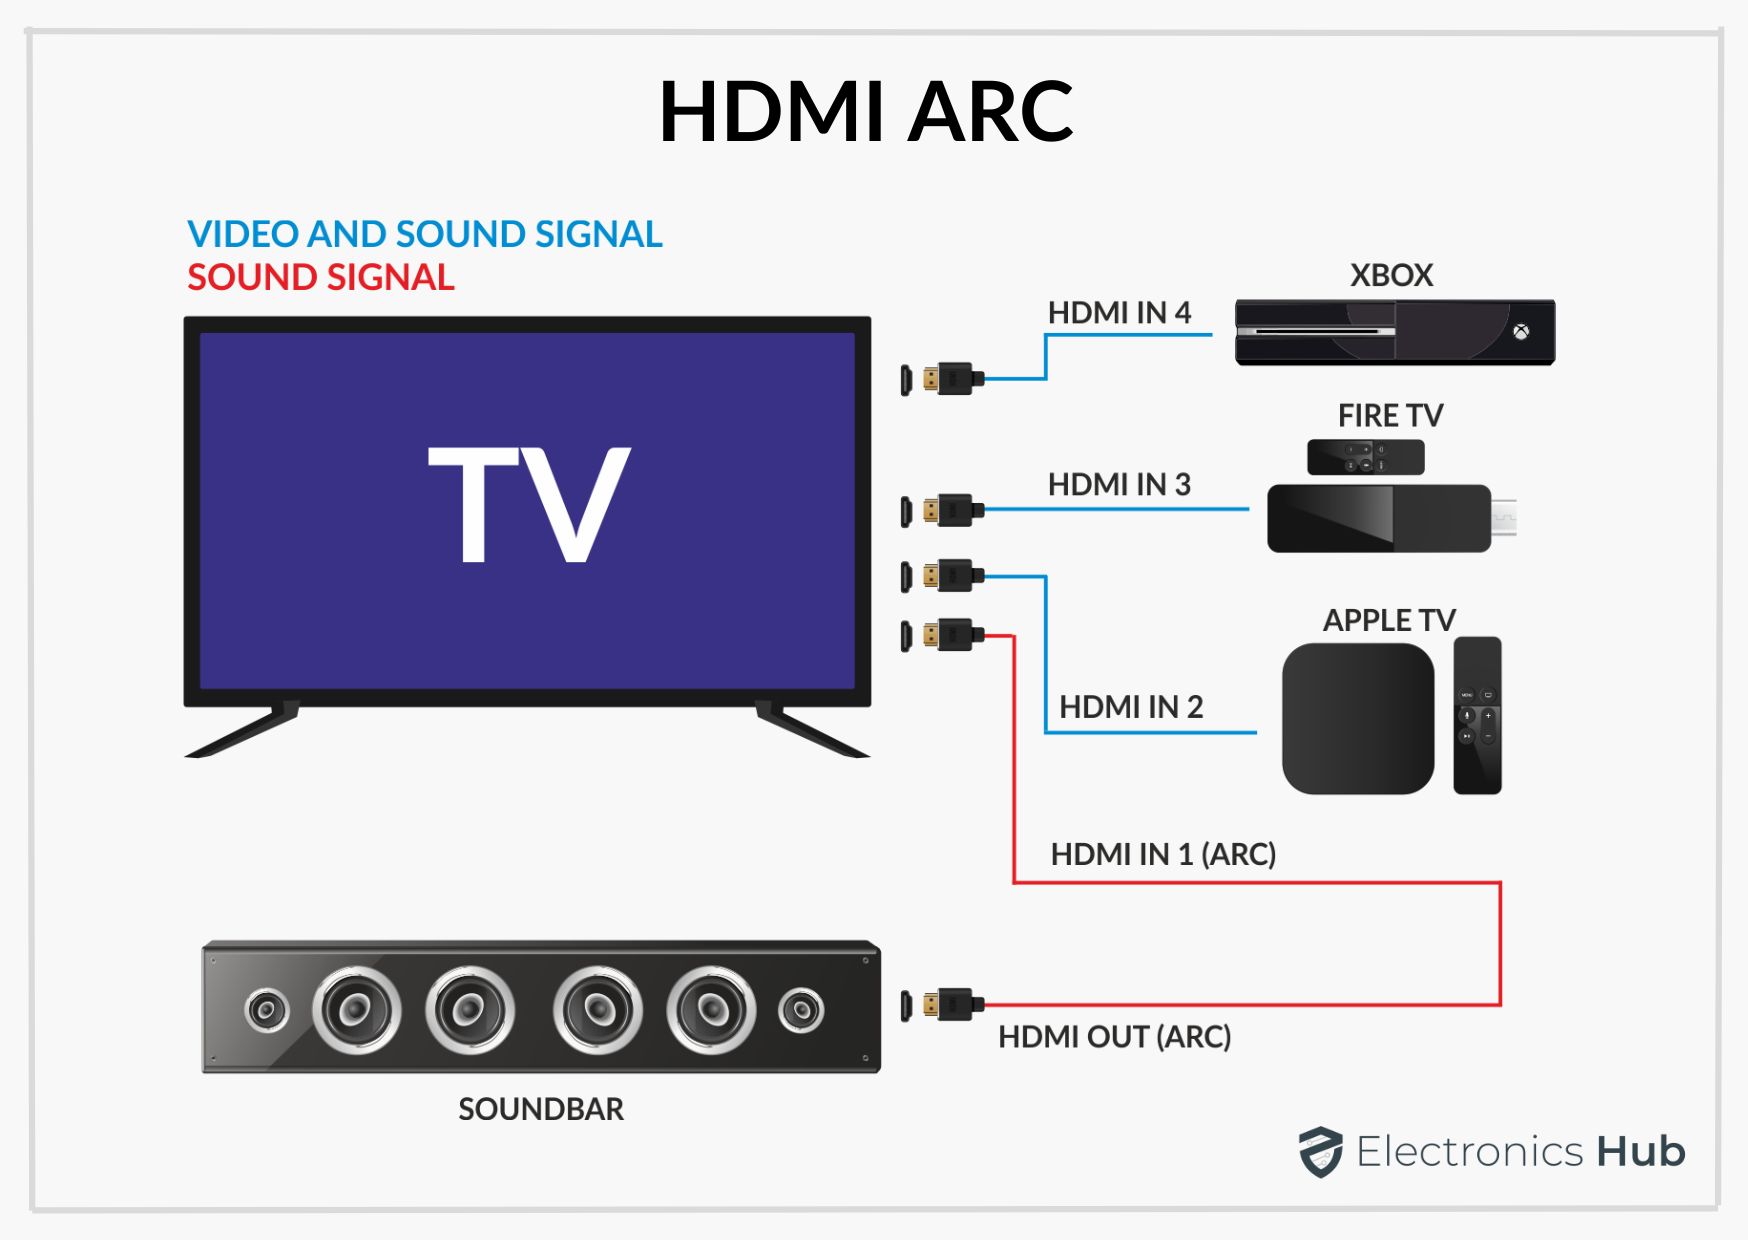 What is the Audio Return Channel (ARC) feature?